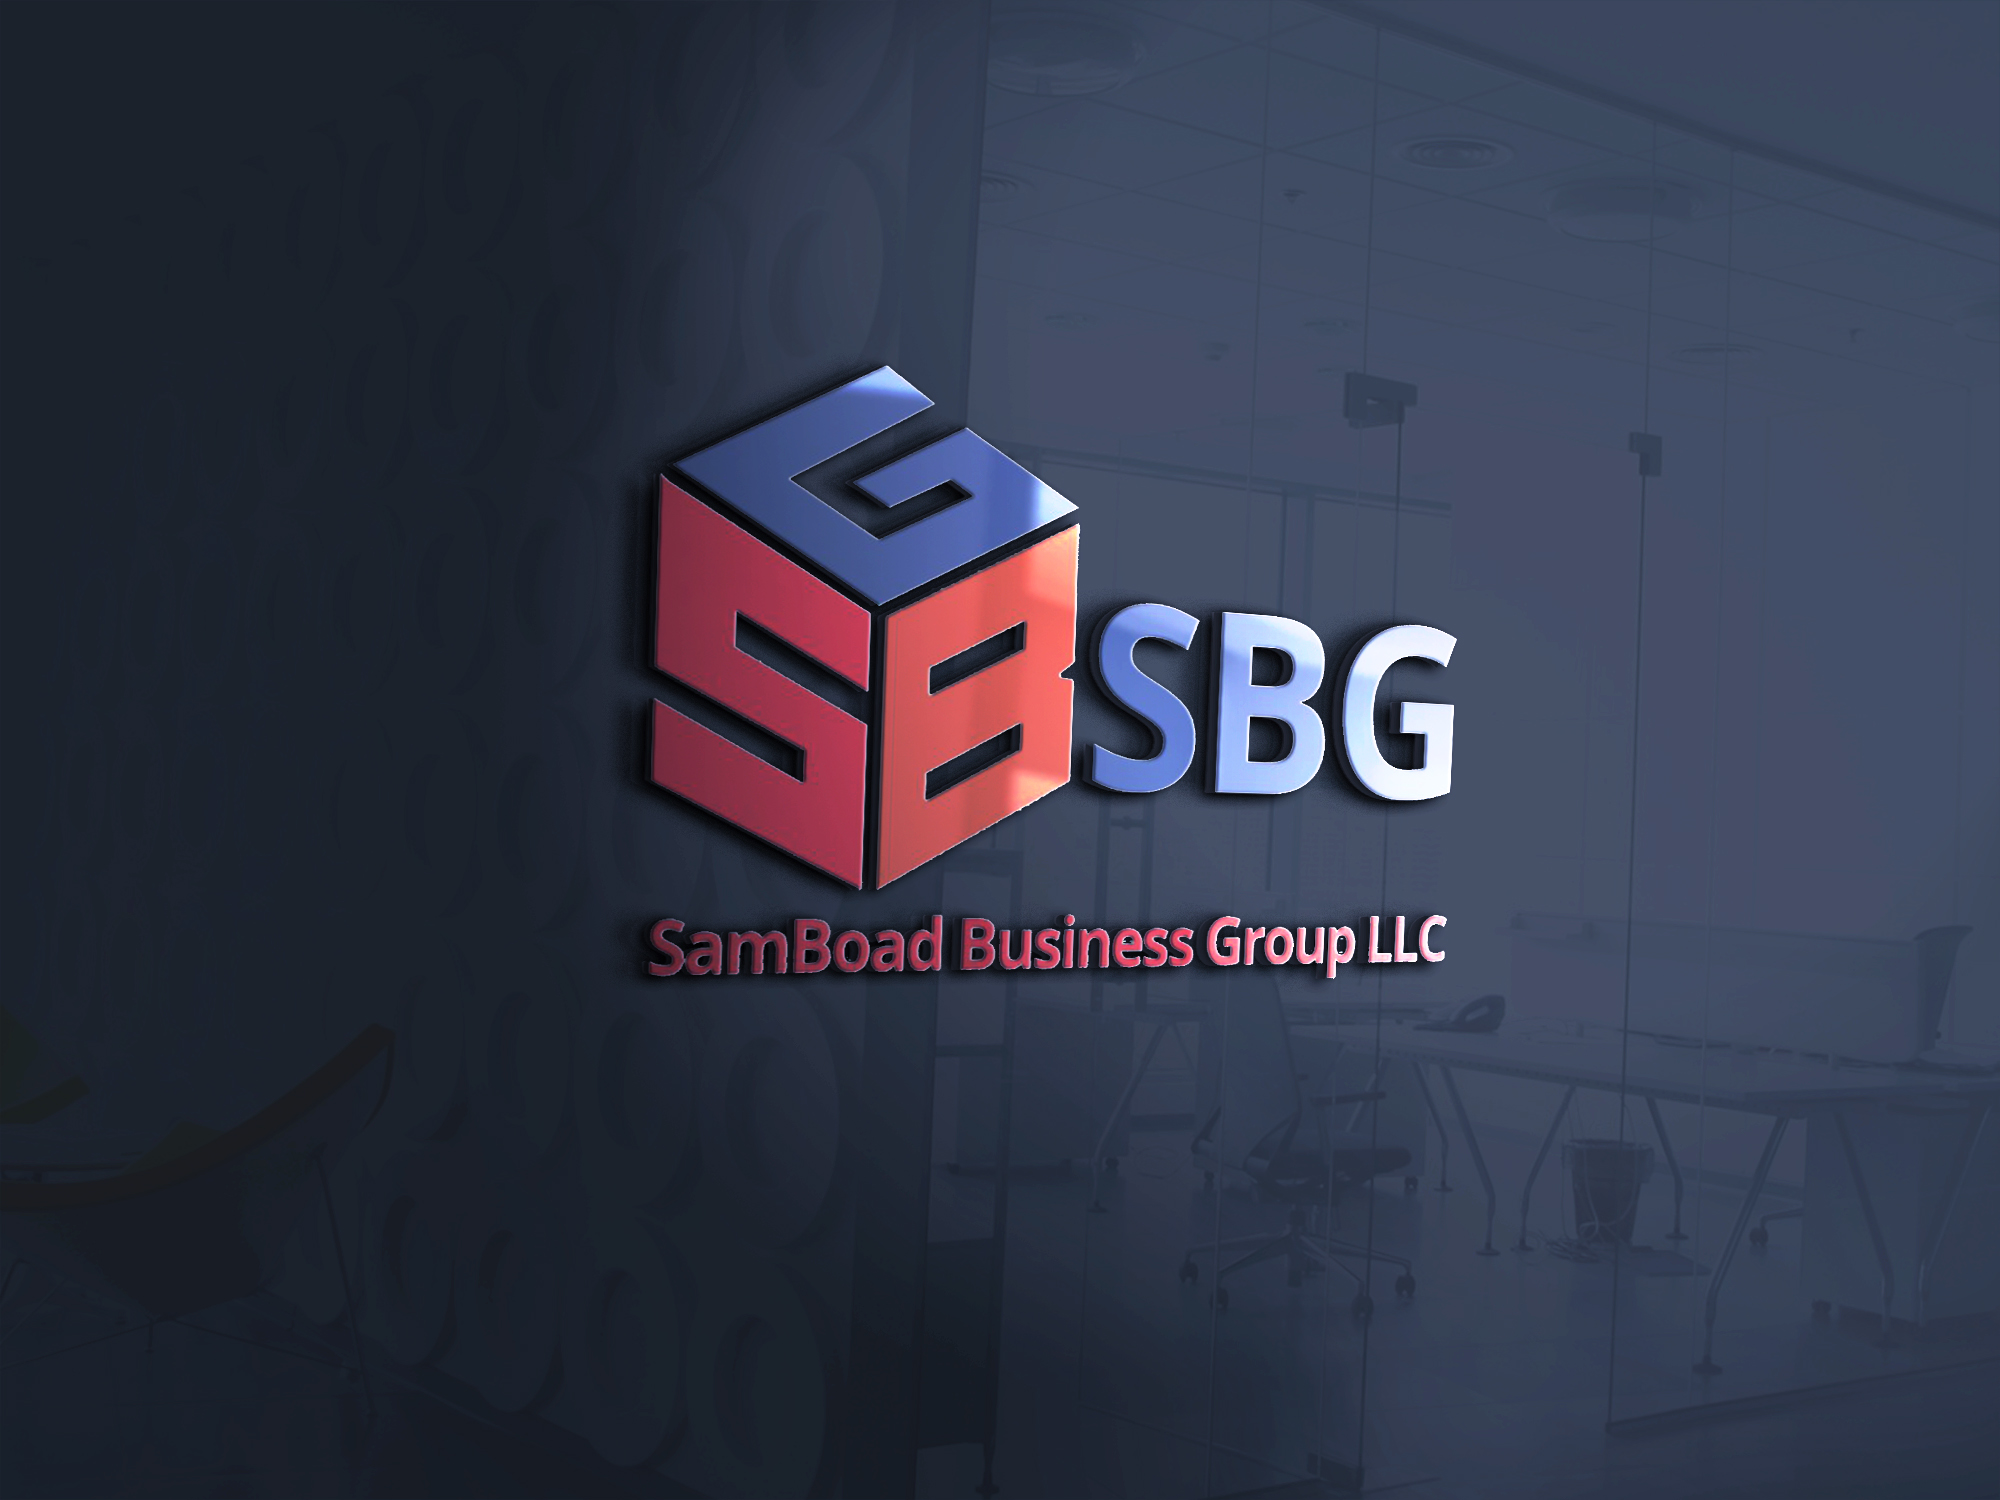 About SamBoad Business Group Limited